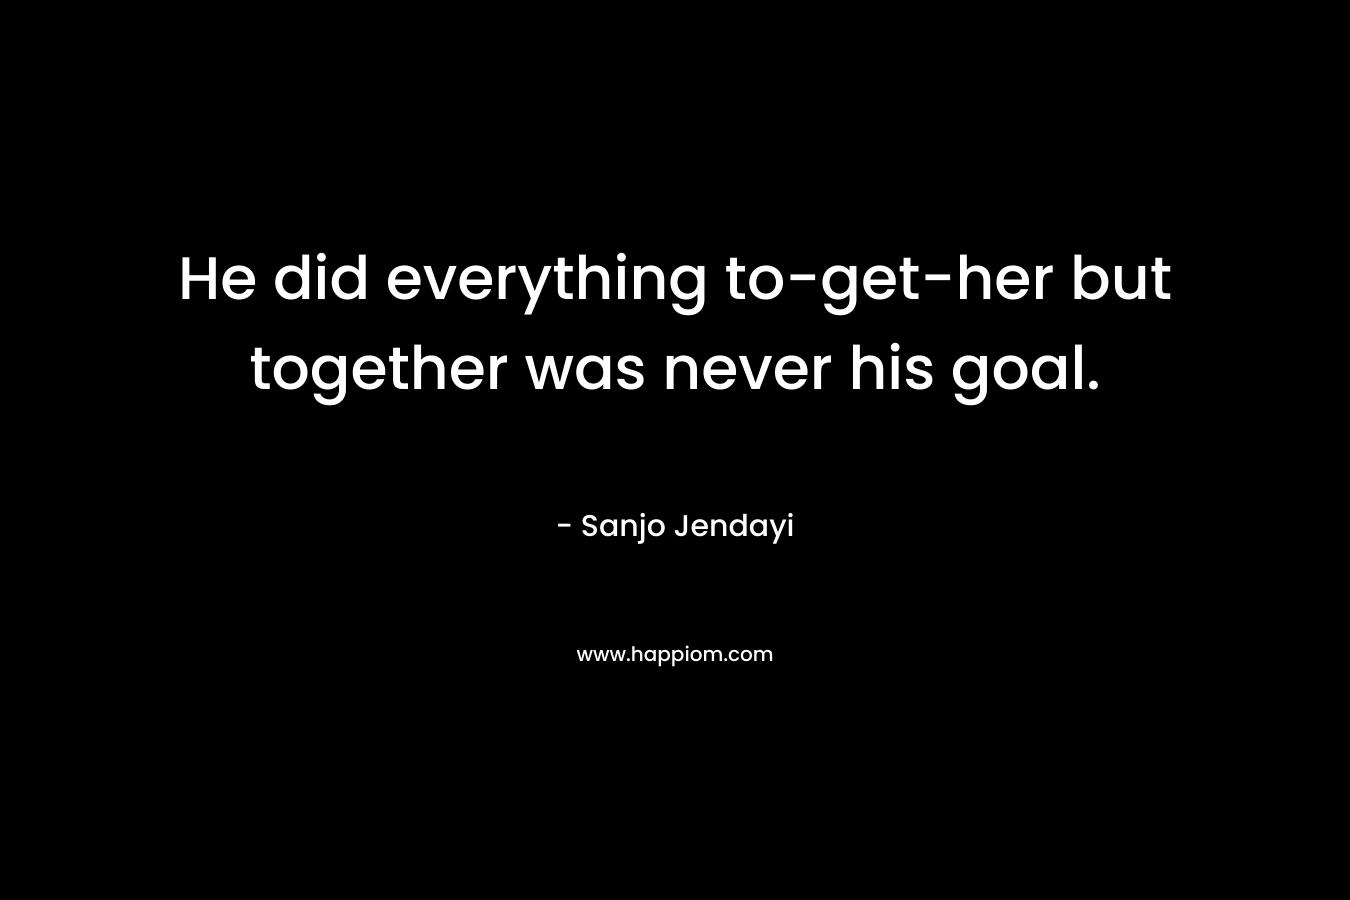 He did everything to-get-her but together was never his goal. – Sanjo Jendayi